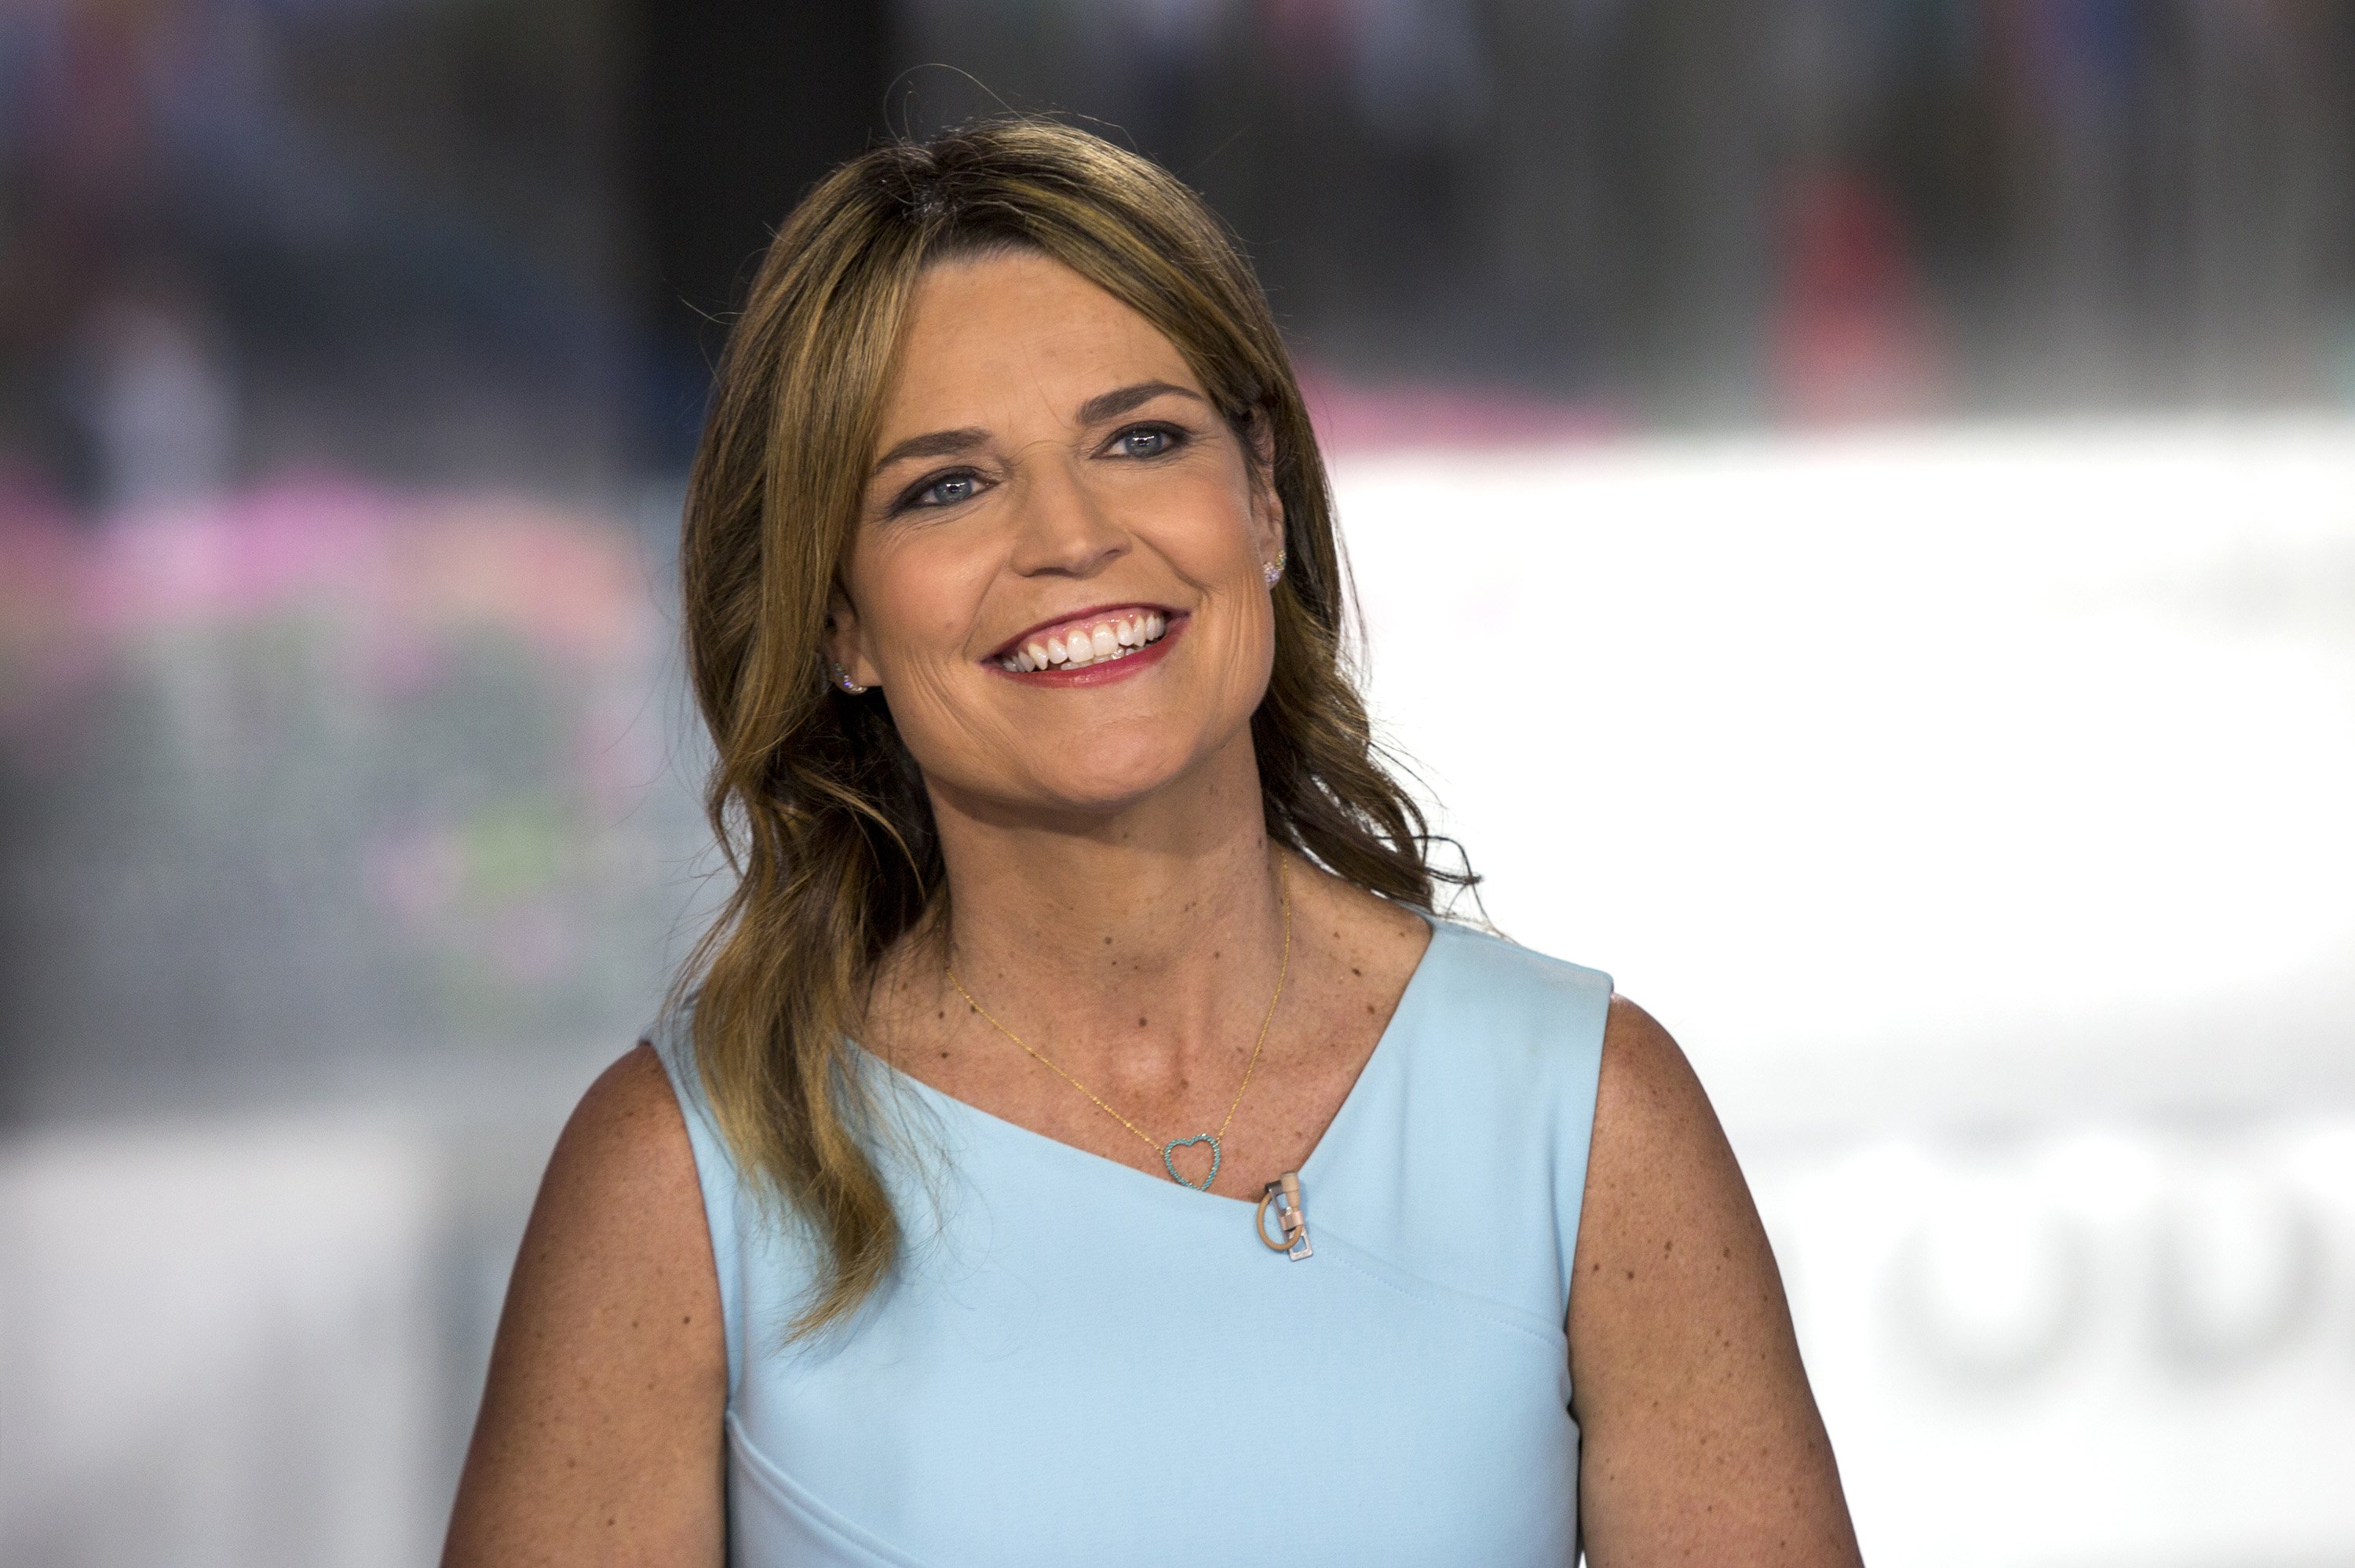 Savannah Guthrie on Season 67 of the Today Show, 2018 | Source: Getty Images